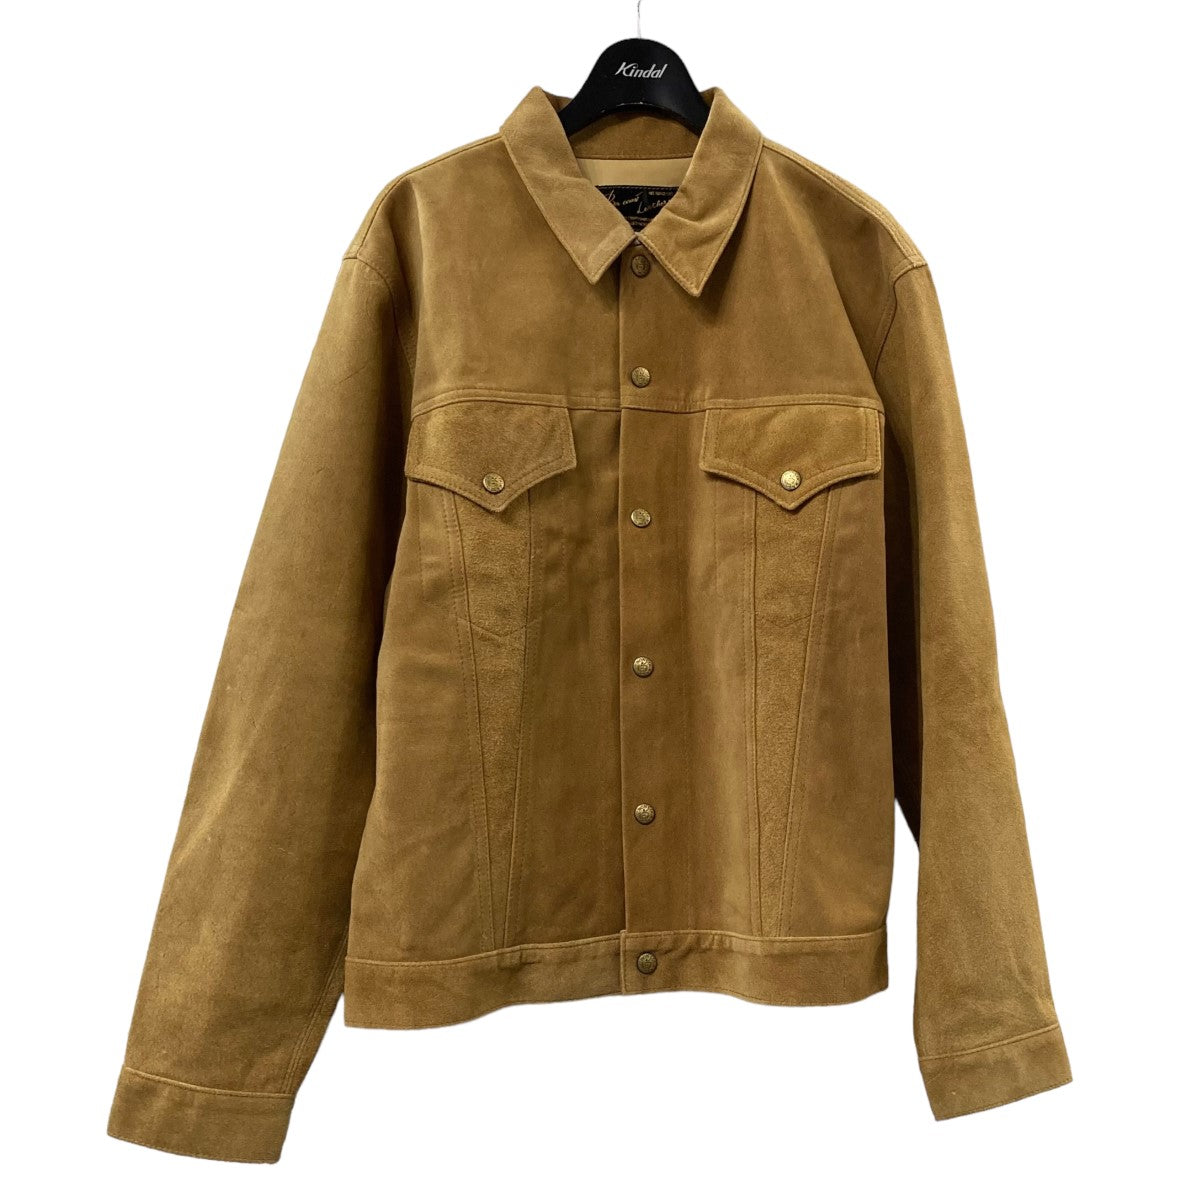 BONCOURA(ボンクラ) 「Leather Jacket 3rd Suede」 スエードレザー 